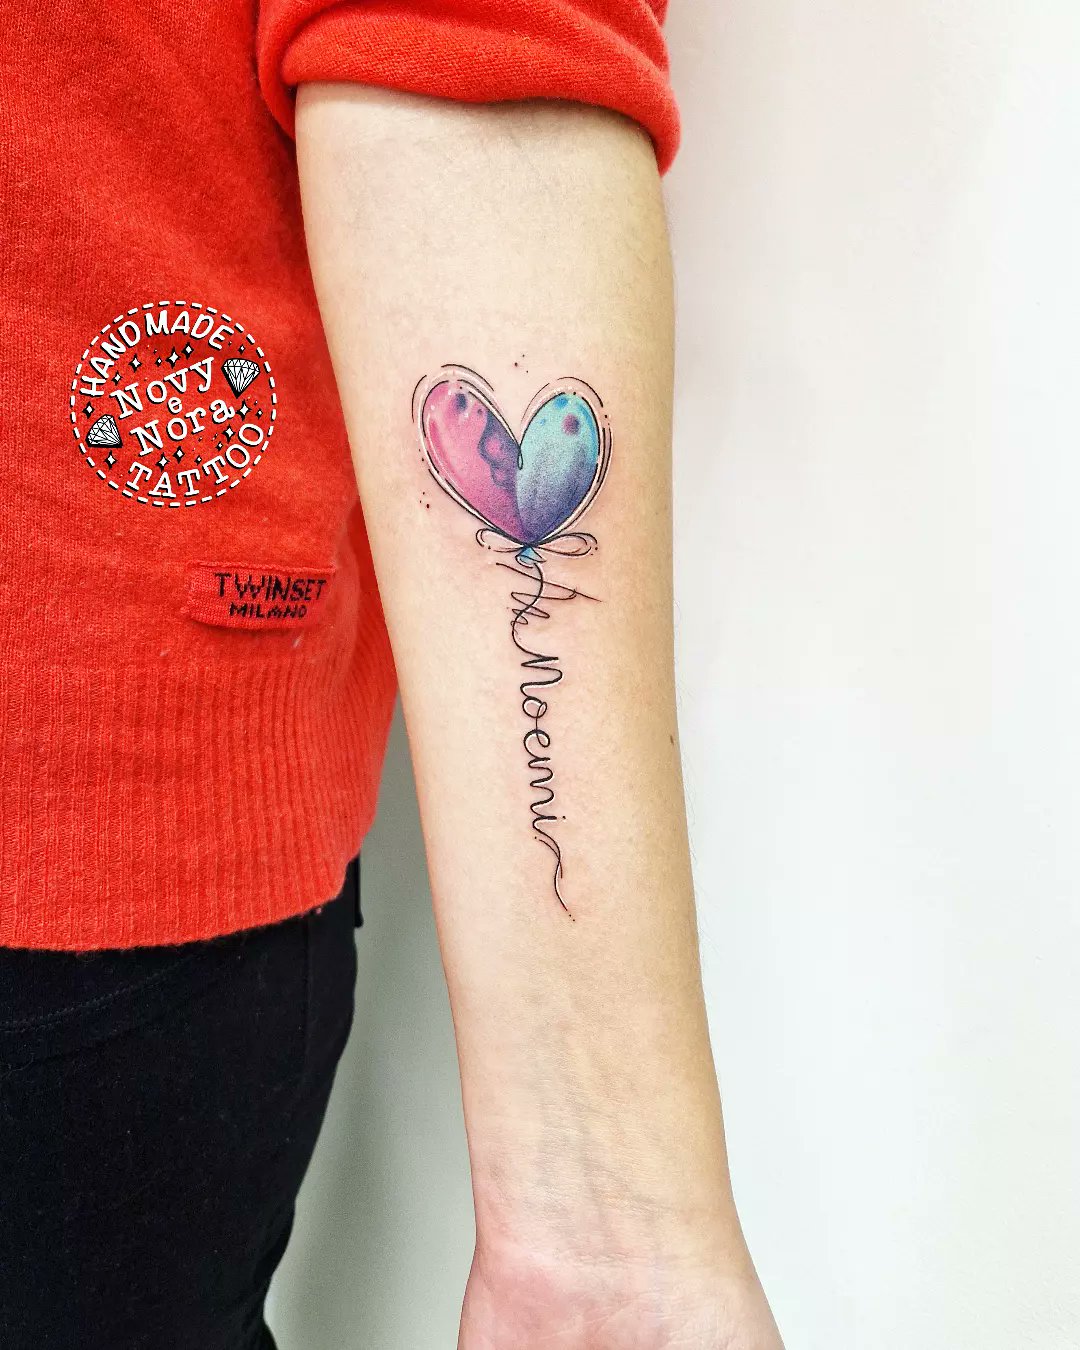 TAG Studio - Watercolour Heart done by @laurissa.art Would you like a watercolour  tattoo? Message us now to book in. www.instagram.com/tabooartgallery  www.facebook.com/tabooartgallery Email: tabooartgallery@gmail.com  #bishoprotary @killerinktattoo ...